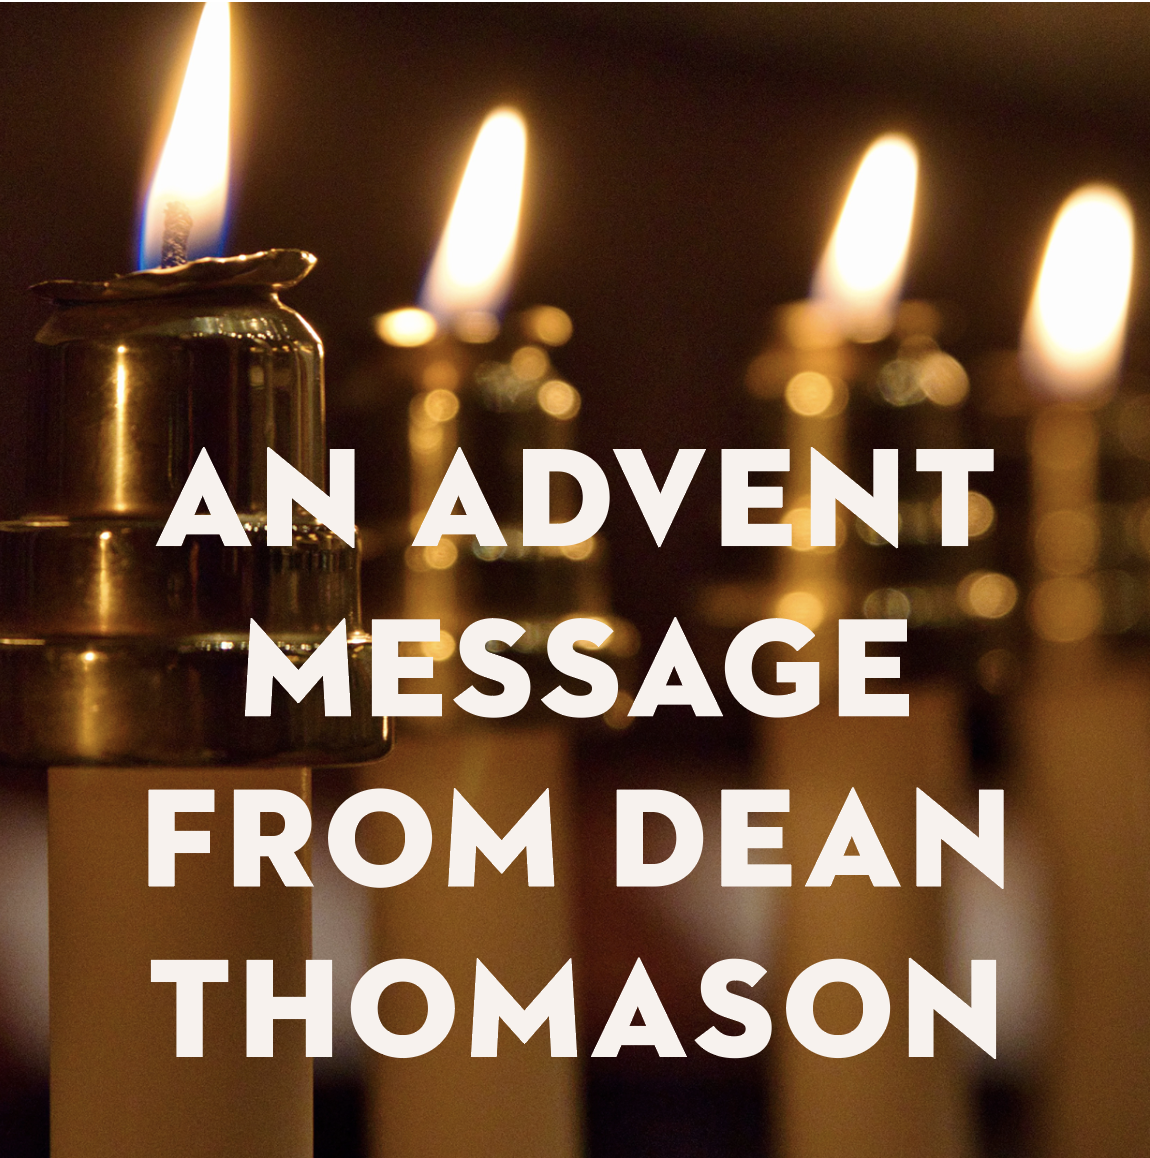 An Advent Message from Dean Thomason